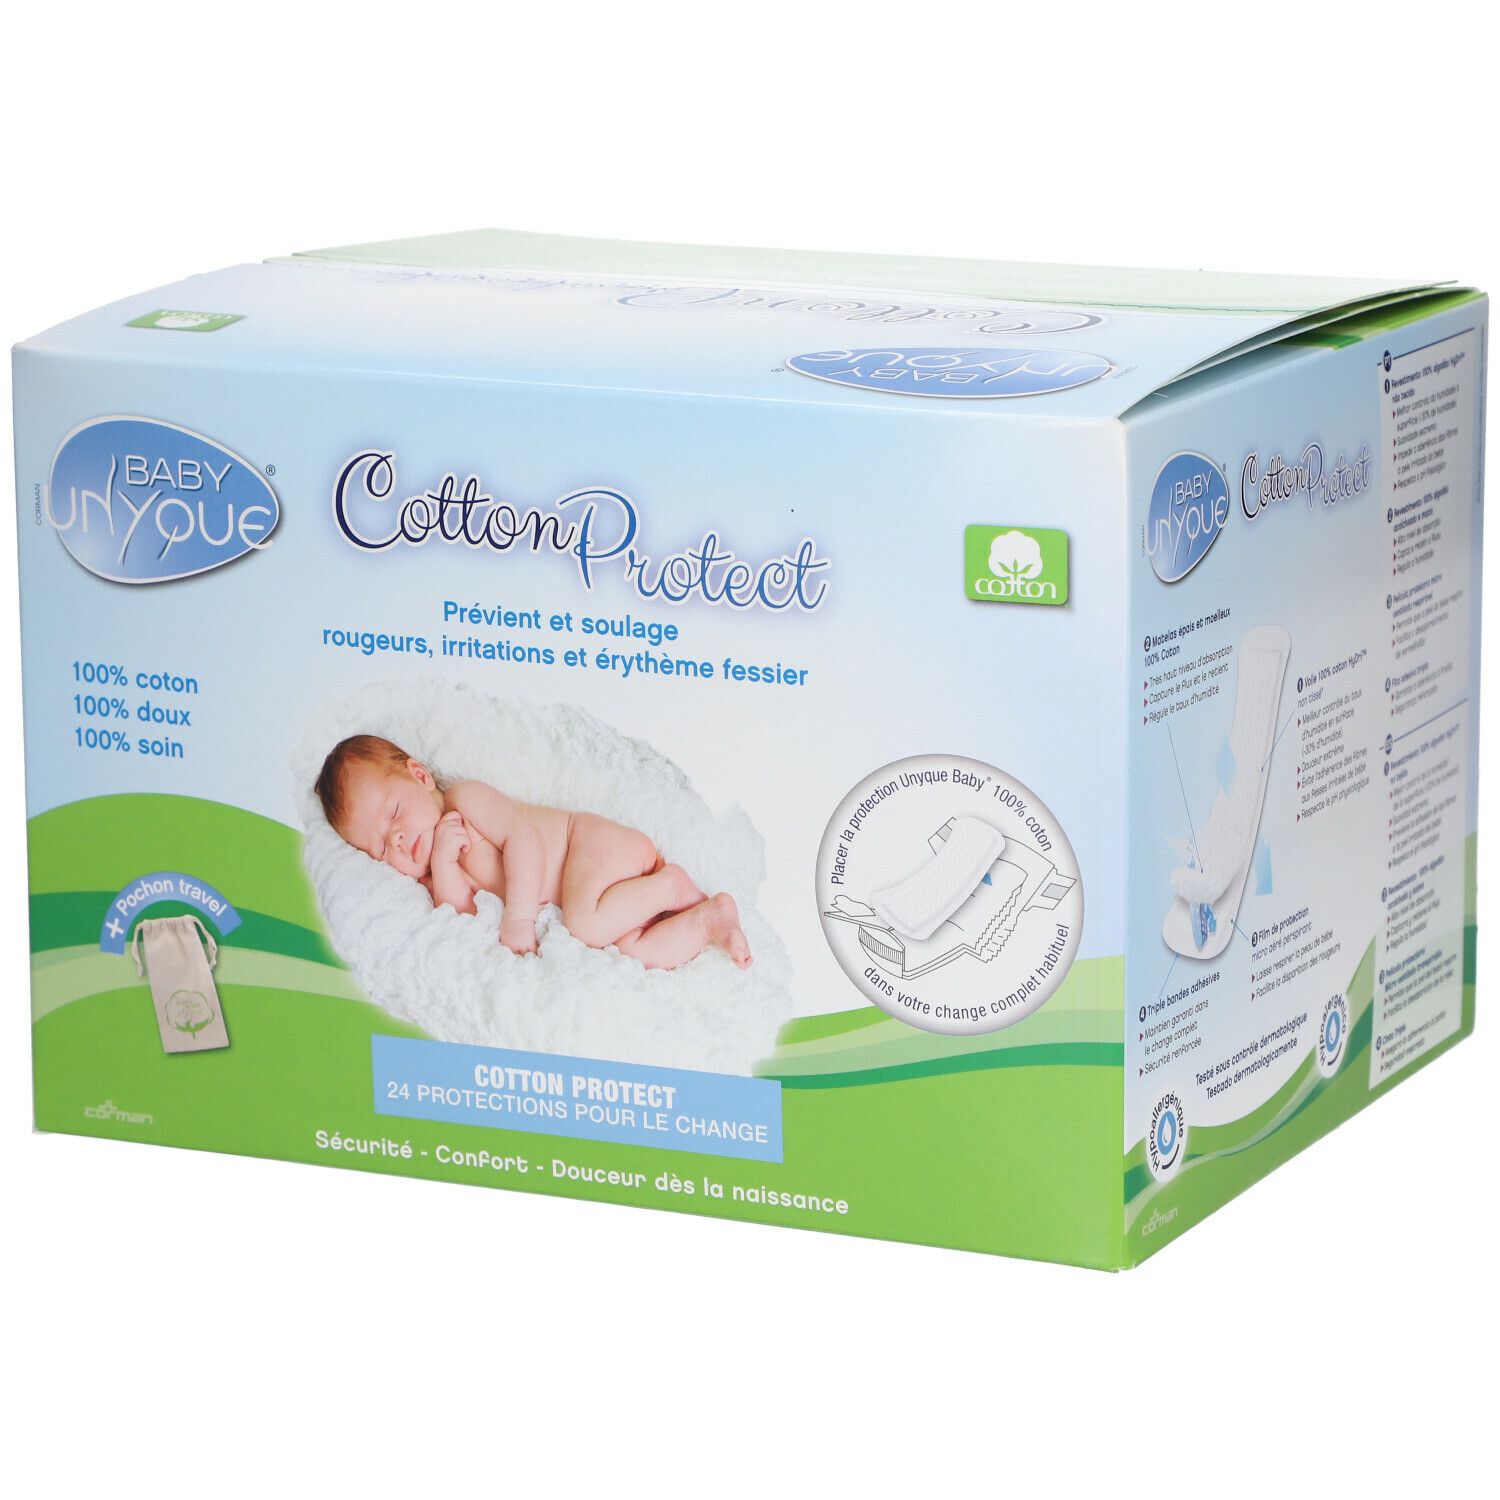 Unyque Baby Cotton Protect